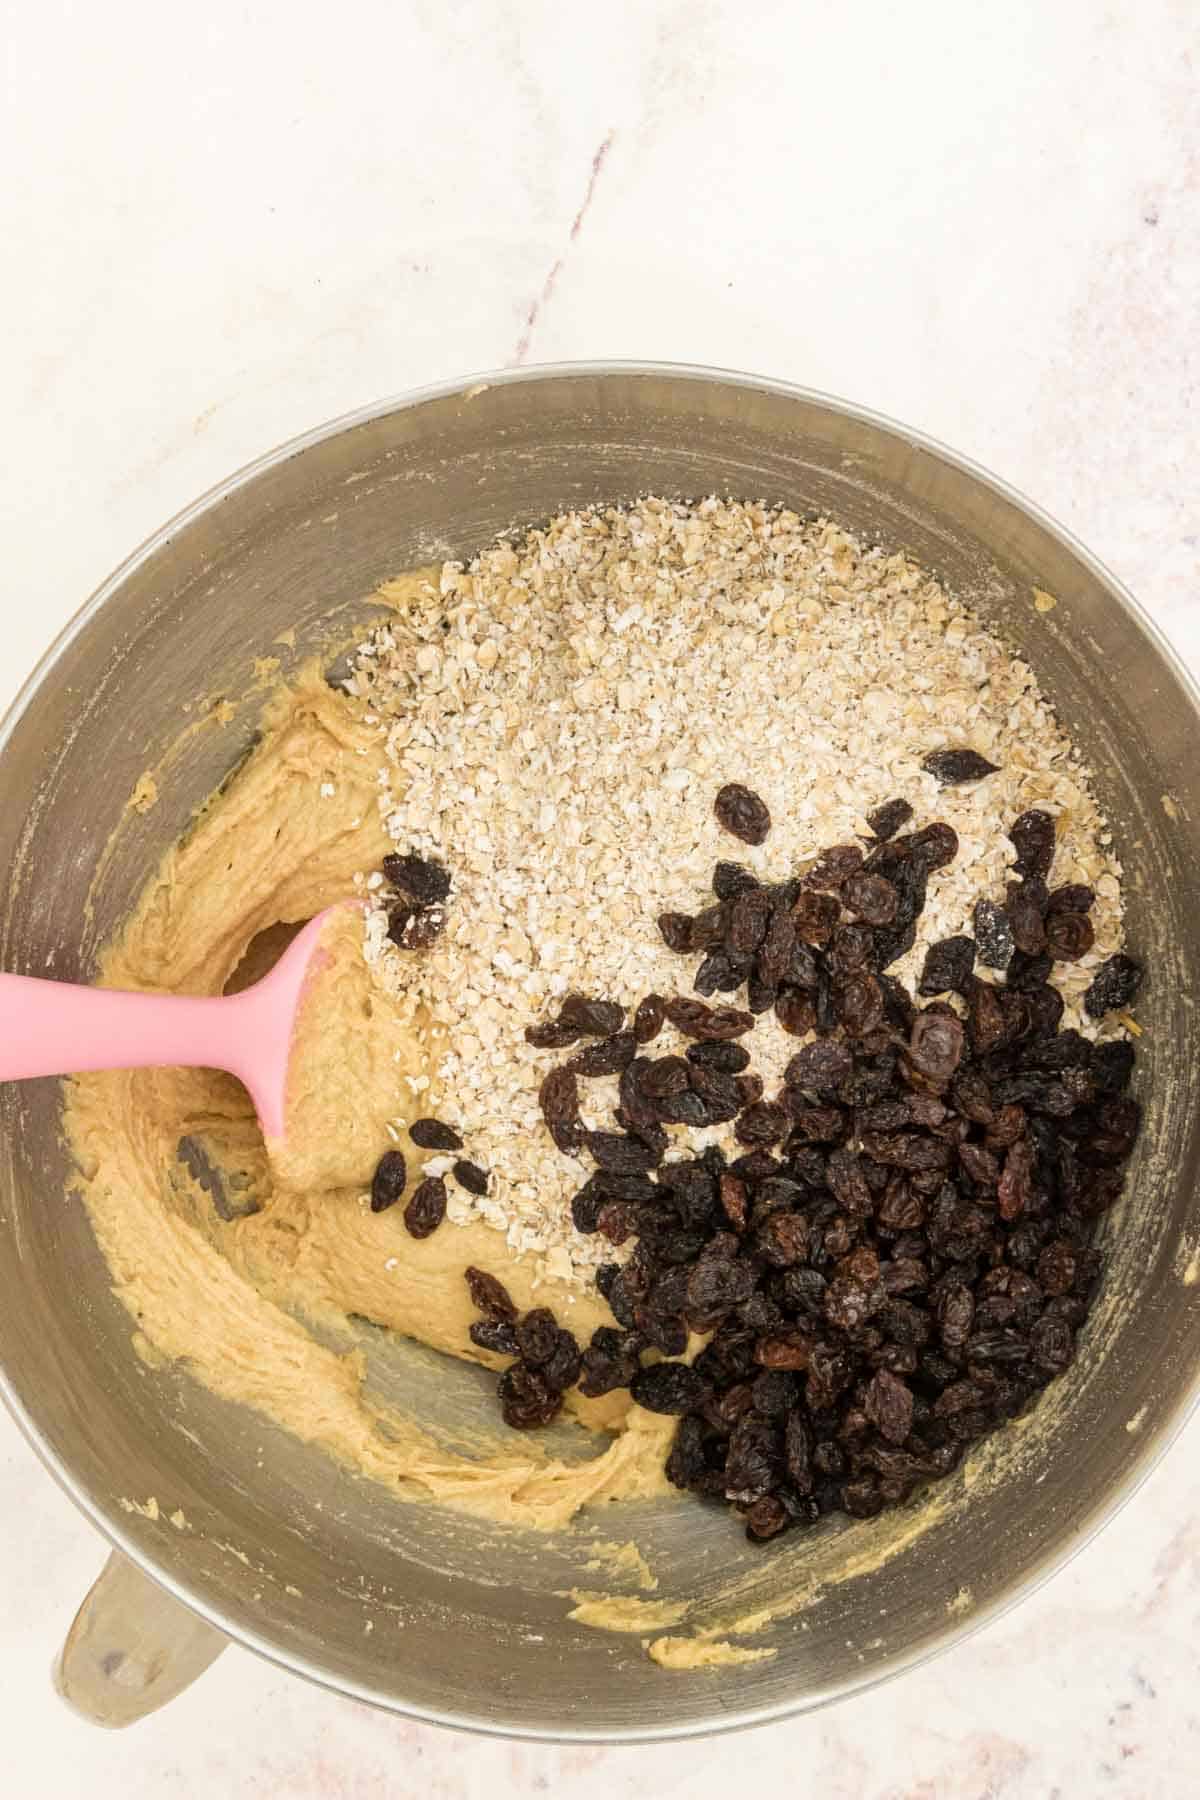 Oats and raisins are added into a bowl of cookie dough.